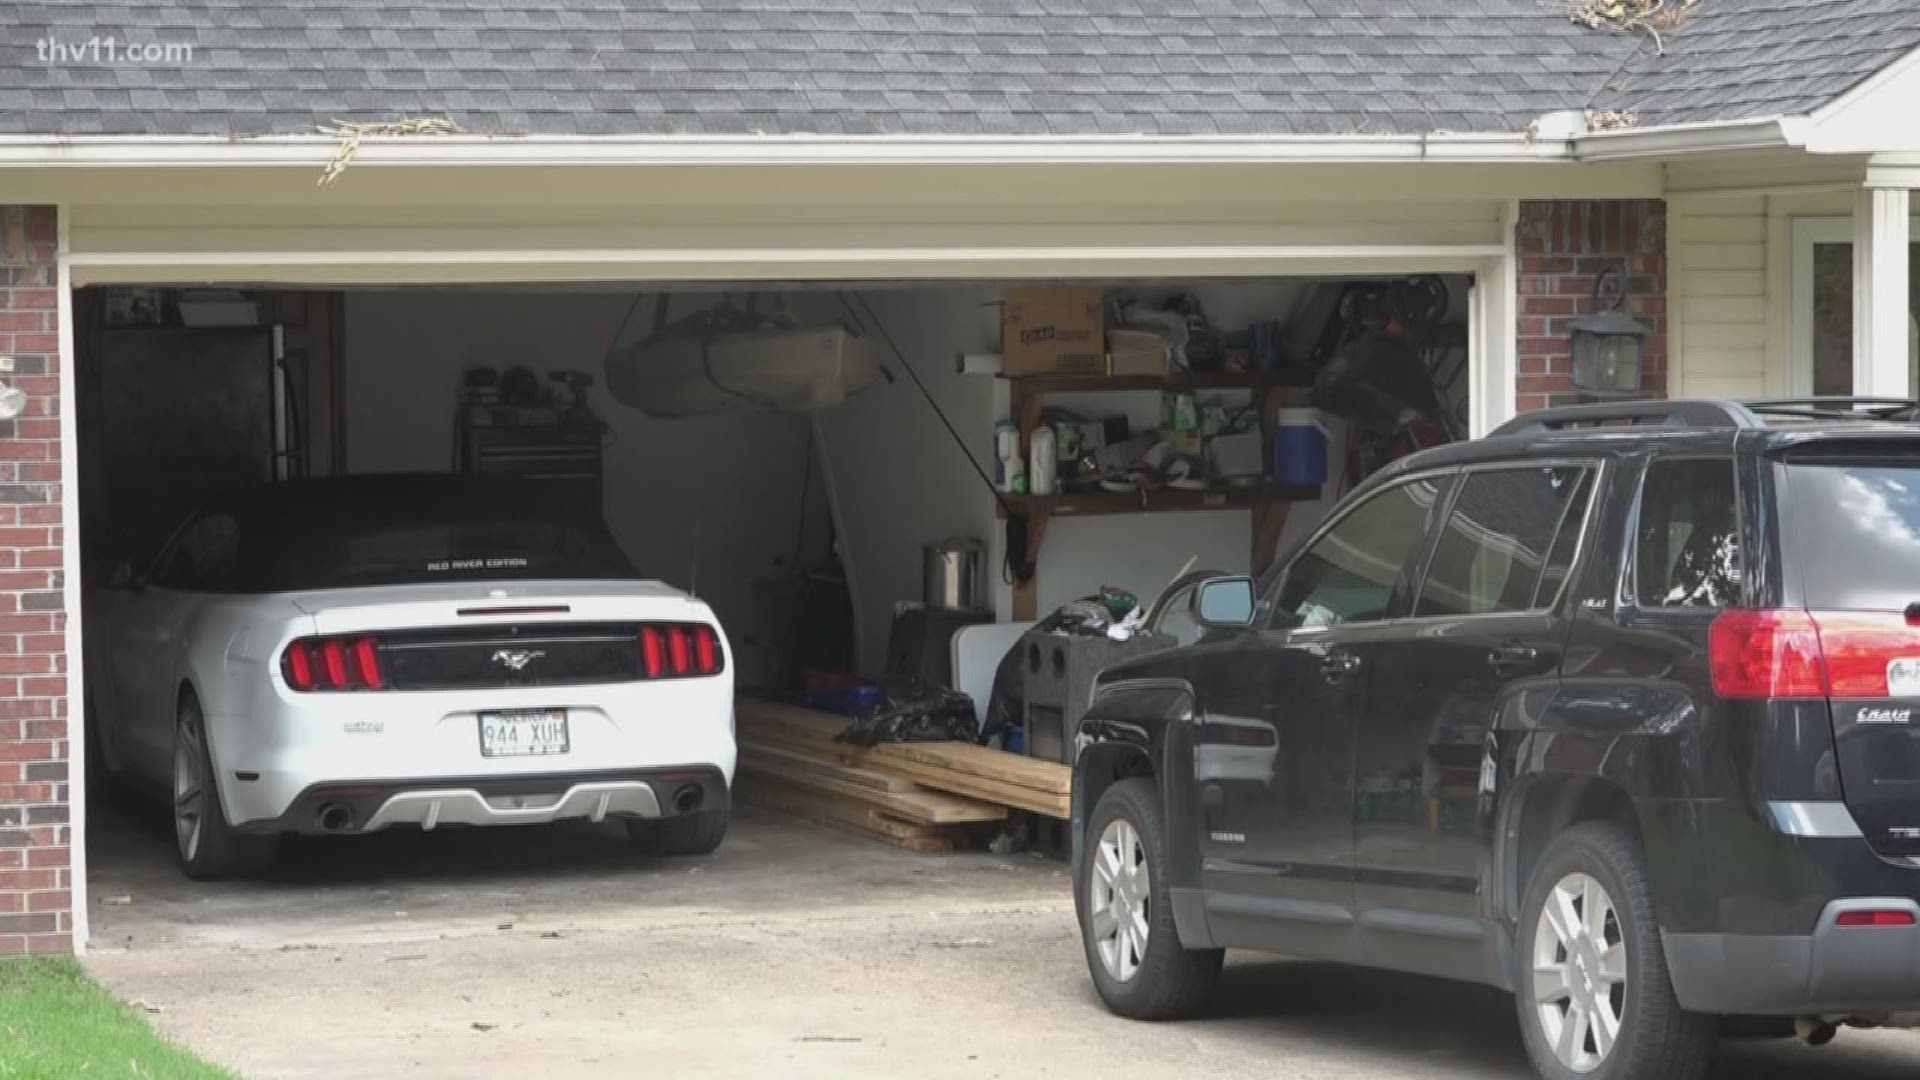 Maumelle police say it's common for garage thefts to rise in the warmer months, but lately, they've been seeing an unusually high number.